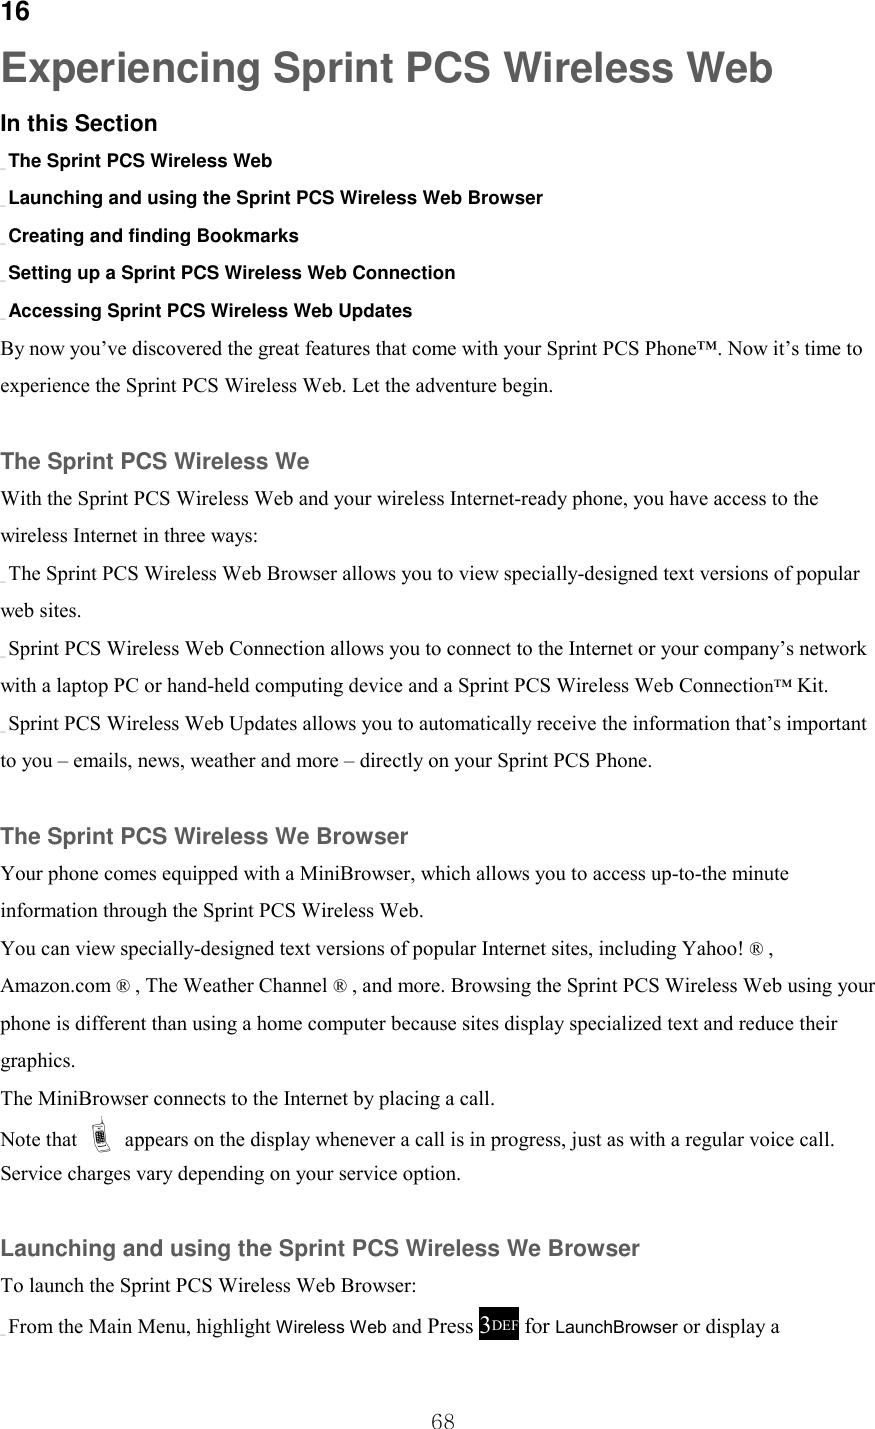  68 16 Experiencing Sprint PCS Wireless Web In this Section _ The Sprint PCS Wireless Web _ Launching and using the Sprint PCS Wireless Web Browser _ Creating and finding Bookmarks _ Setting up a Sprint PCS Wireless Web Connection _ Accessing Sprint PCS Wireless Web Updates By now you’ve discovered the great features that come with your Sprint PCS Phone™. Now it’s time to experience the Sprint PCS Wireless Web. Let the adventure begin.  The Sprint PCS Wireless We With the Sprint PCS Wireless Web and your wireless Internet-ready phone, you have access to the wireless Internet in three ways: _ The Sprint PCS Wireless Web Browser allows you to view specially-designed text versions of popular web sites. _ Sprint PCS Wireless Web Connection allows you to connect to the Internet or your company’s network with a laptop PC or hand-held computing device and a Sprint PCS Wireless Web Connection™ Kit. _ Sprint PCS Wireless Web Updates allows you to automatically receive the information that’s important to you – emails, news, weather and more – directly on your Sprint PCS Phone.  The Sprint PCS Wireless We Browser Your phone comes equipped with a MiniBrowser, which allows you to access up-to-the minute information through the Sprint PCS Wireless Web. You can view specially-designed text versions of popular Internet sites, including Yahoo! ® , Amazon.com ® , The Weather Channel ® , and more. Browsing the Sprint PCS Wireless Web using your phone is different than using a home computer because sites display specialized text and reduce their graphics. The MiniBrowser connects to the Internet by placing a call. Note that ! appears on the display whenever a call is in progress, just as with a regular voice call. Service charges vary depending on your service option.  Launching and using the Sprint PCS Wireless We Browser To launch the Sprint PCS Wireless Web Browser: _ From the Main Menu, highlight Wireless Web and Press 3DEF for LaunchBrowser or display a 